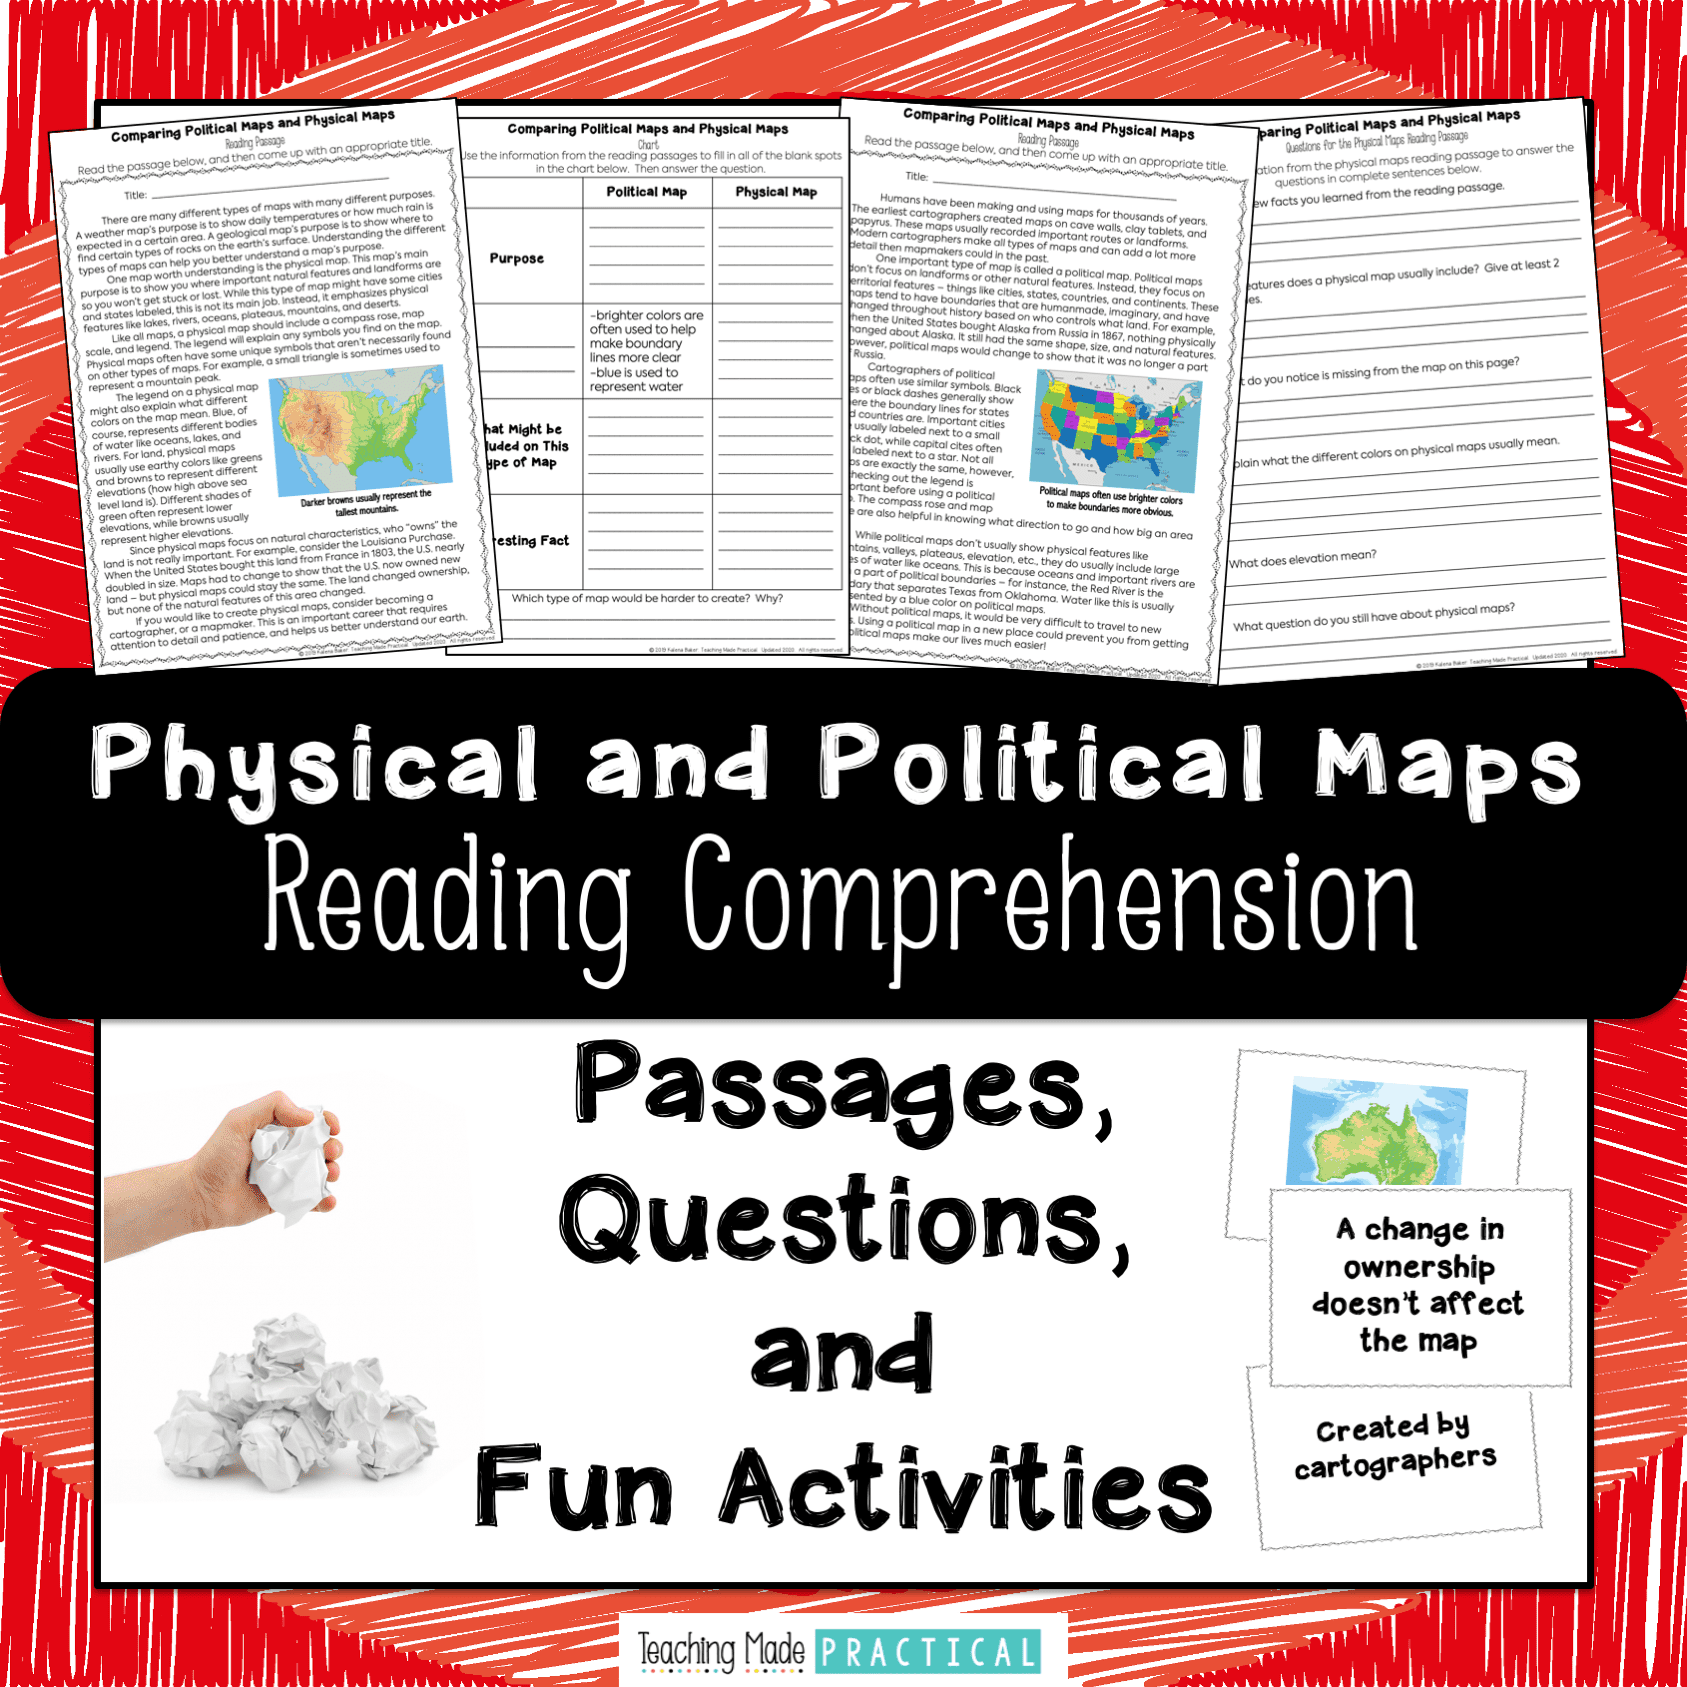 physical and political maps reading comprehension snowball fight for 3rd, 4th, and 5th grade